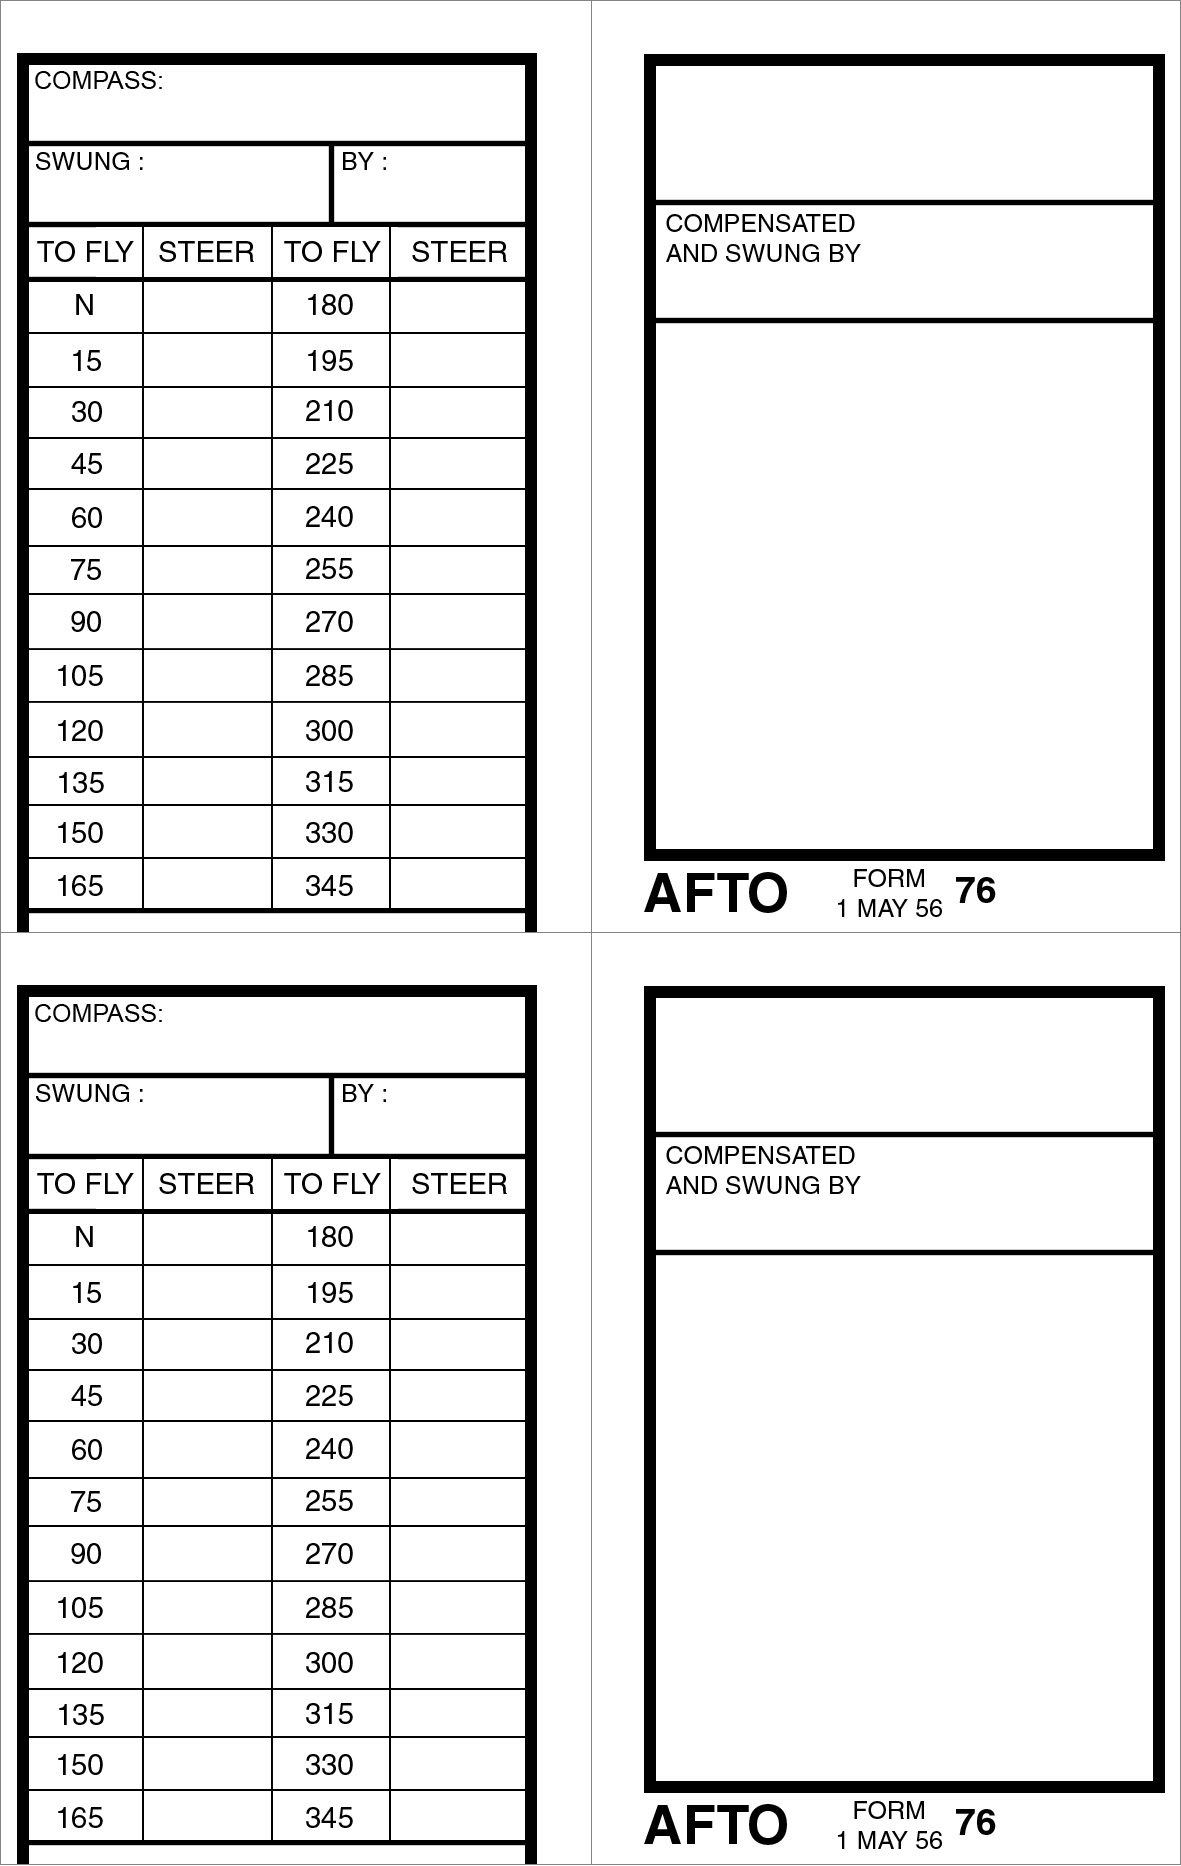 Compass Deviation Card Template Intended For Dd Form 2501 Courier Authorization Card Template